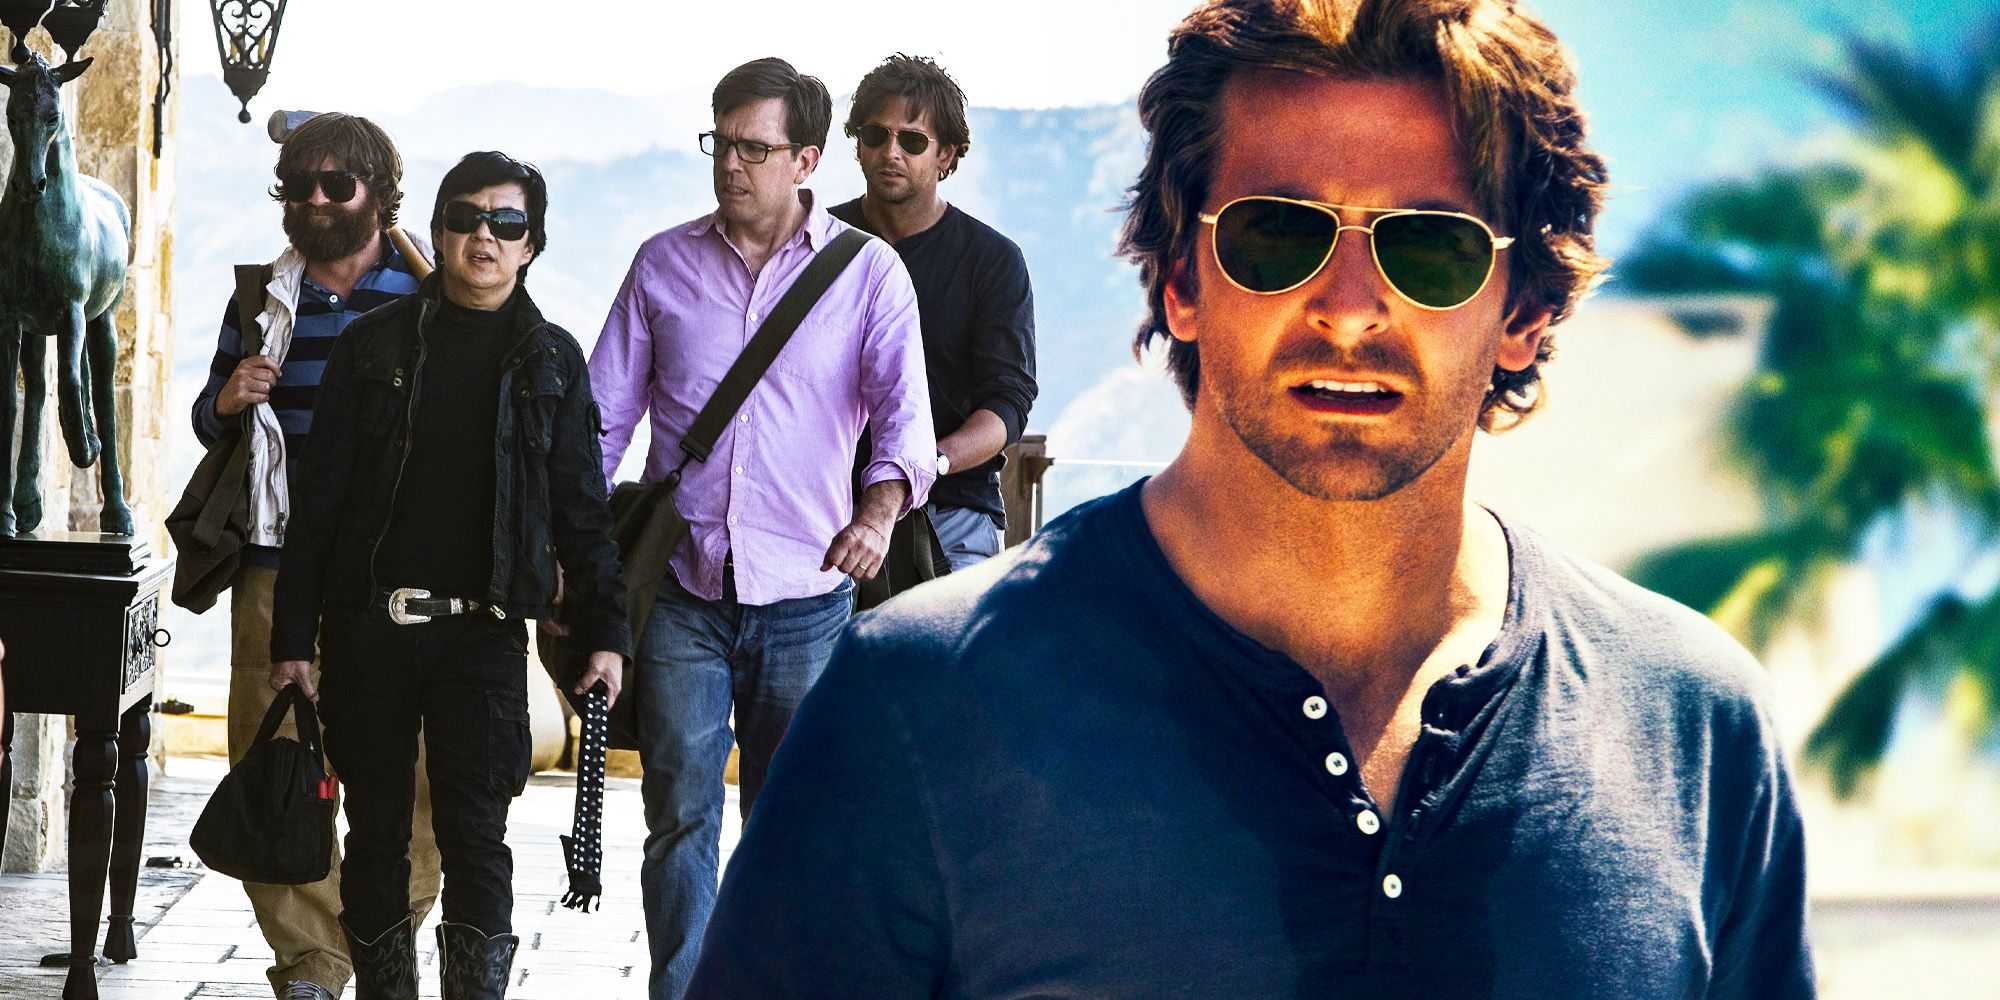 Where Was The Hangover Part 3 Filmed? All Locations Explained